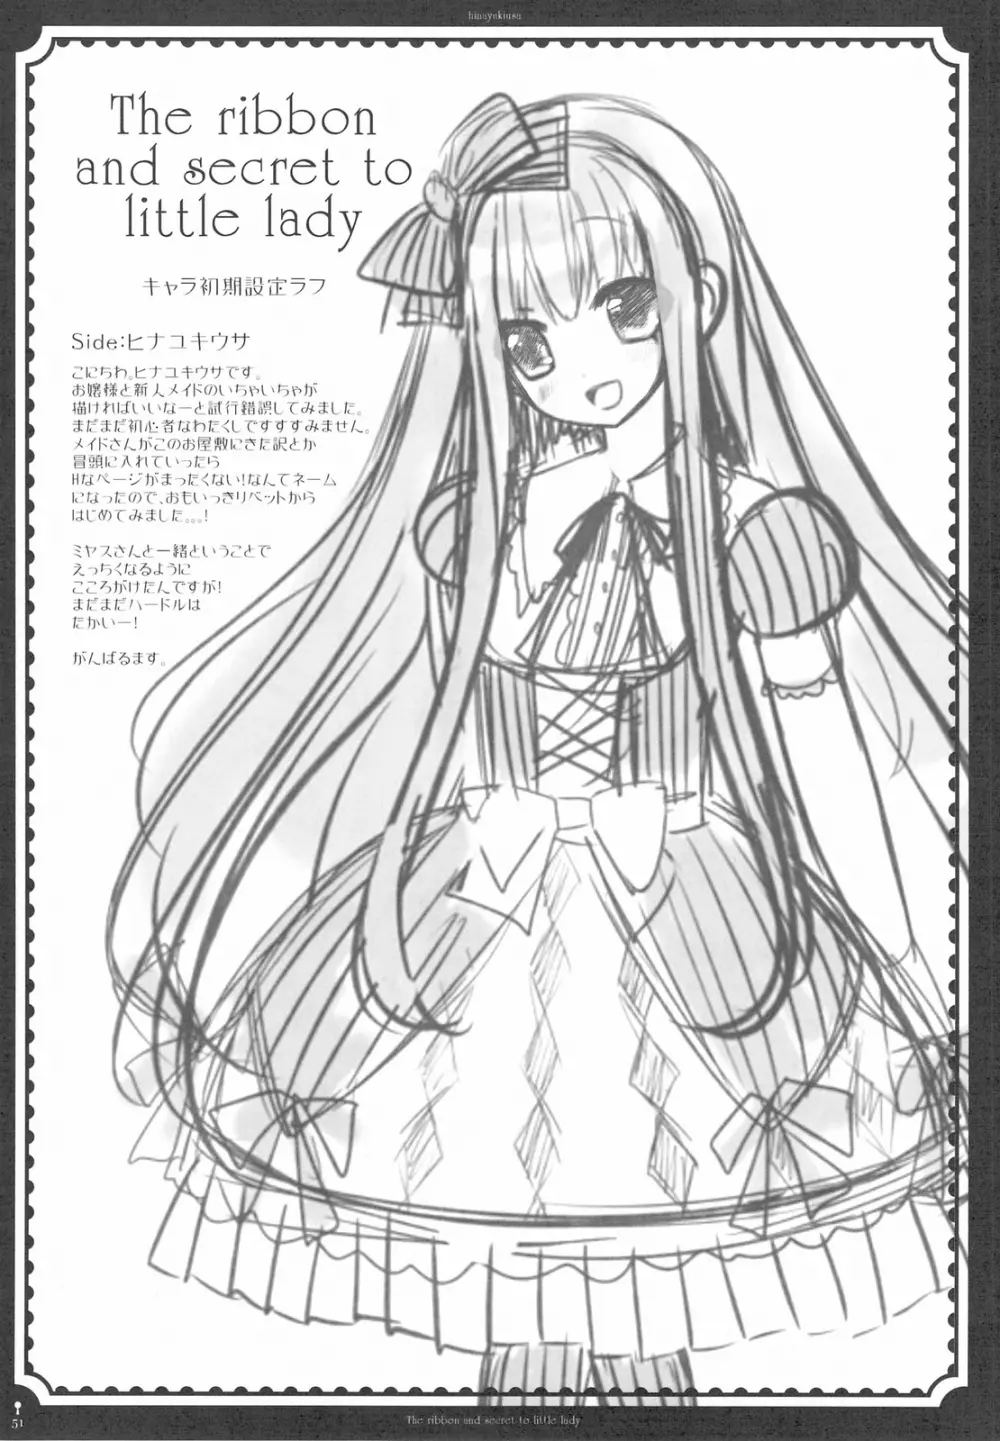 The ribbon and secret to little lady 53ページ